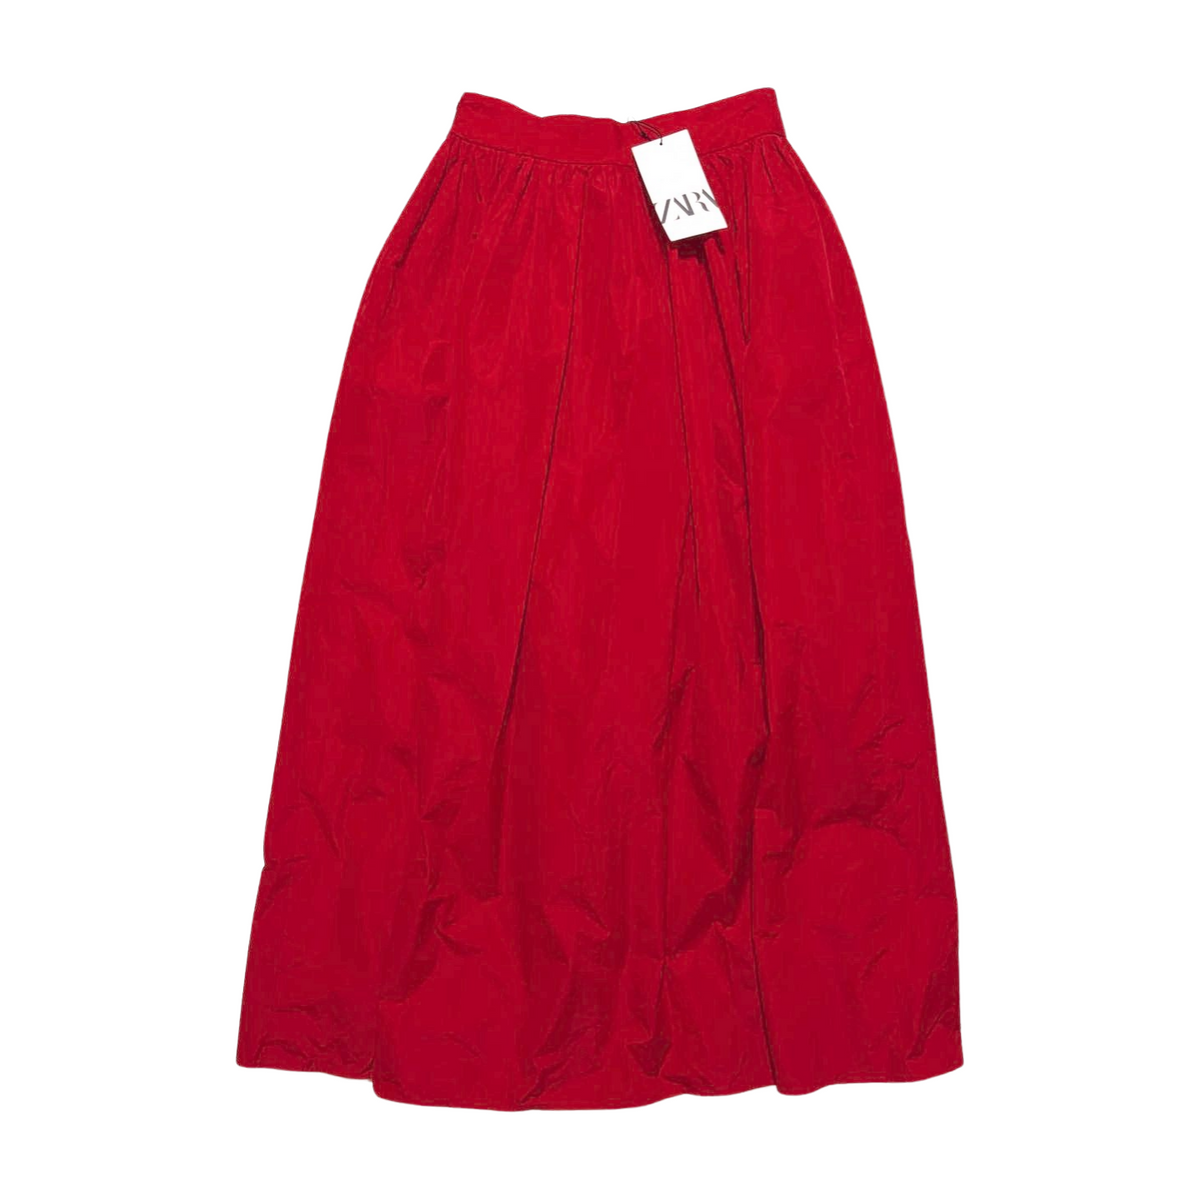 Zara- Red Maxi Skirt NEW WITH TAGS!